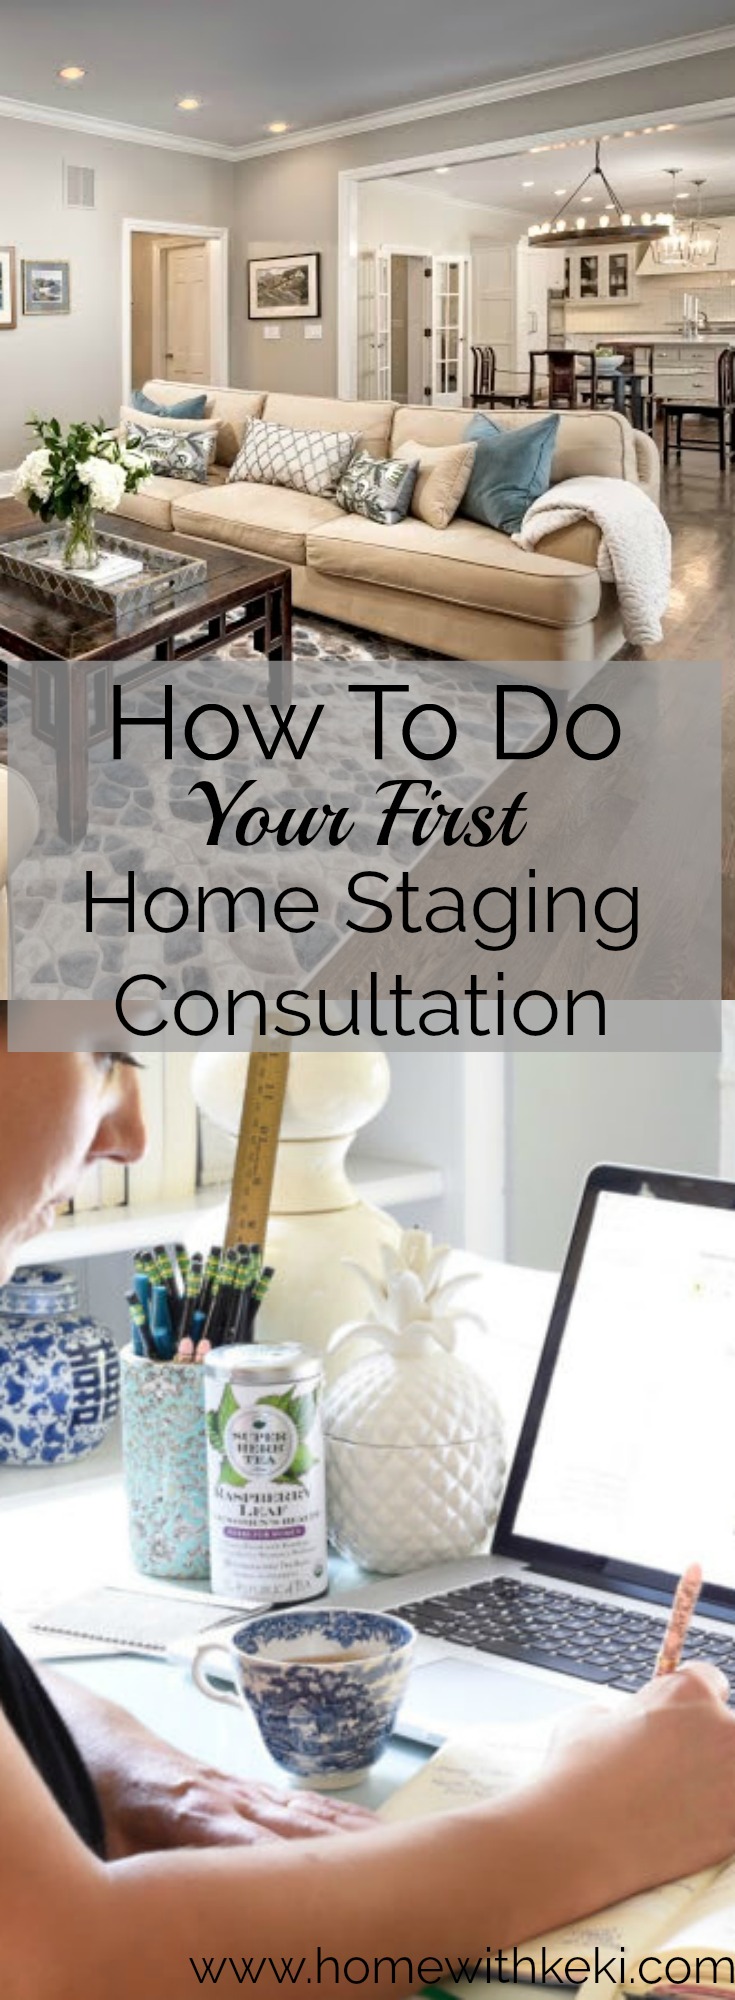 Sharing my top 5 tips on how to conduct a home staging consultation and what you need to bring with you. for more go to www.homewithkeki.com #homestaging #stagedhomes